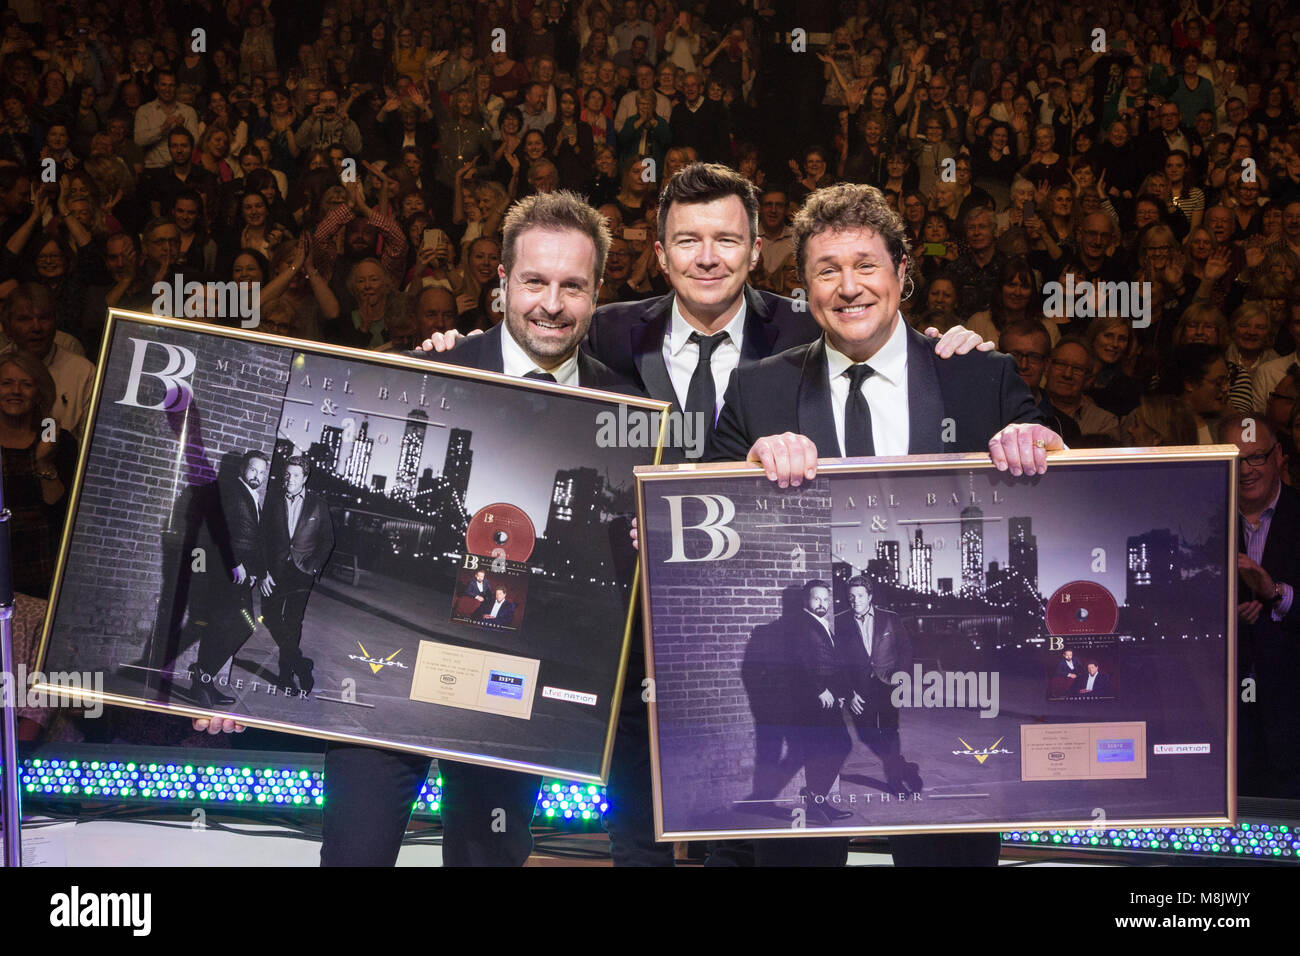 L-R: Alfie Boe, Rick Astley, Michael Ball. Rick Astley presents Michael Ball and Alfie Boe with a golden disc live on stage during their performance at the Eventim Apollo, Hammersmith. Michael Ball and Alfie Boe's album ‘Together’ went gold in just 15 days. Stock Photo